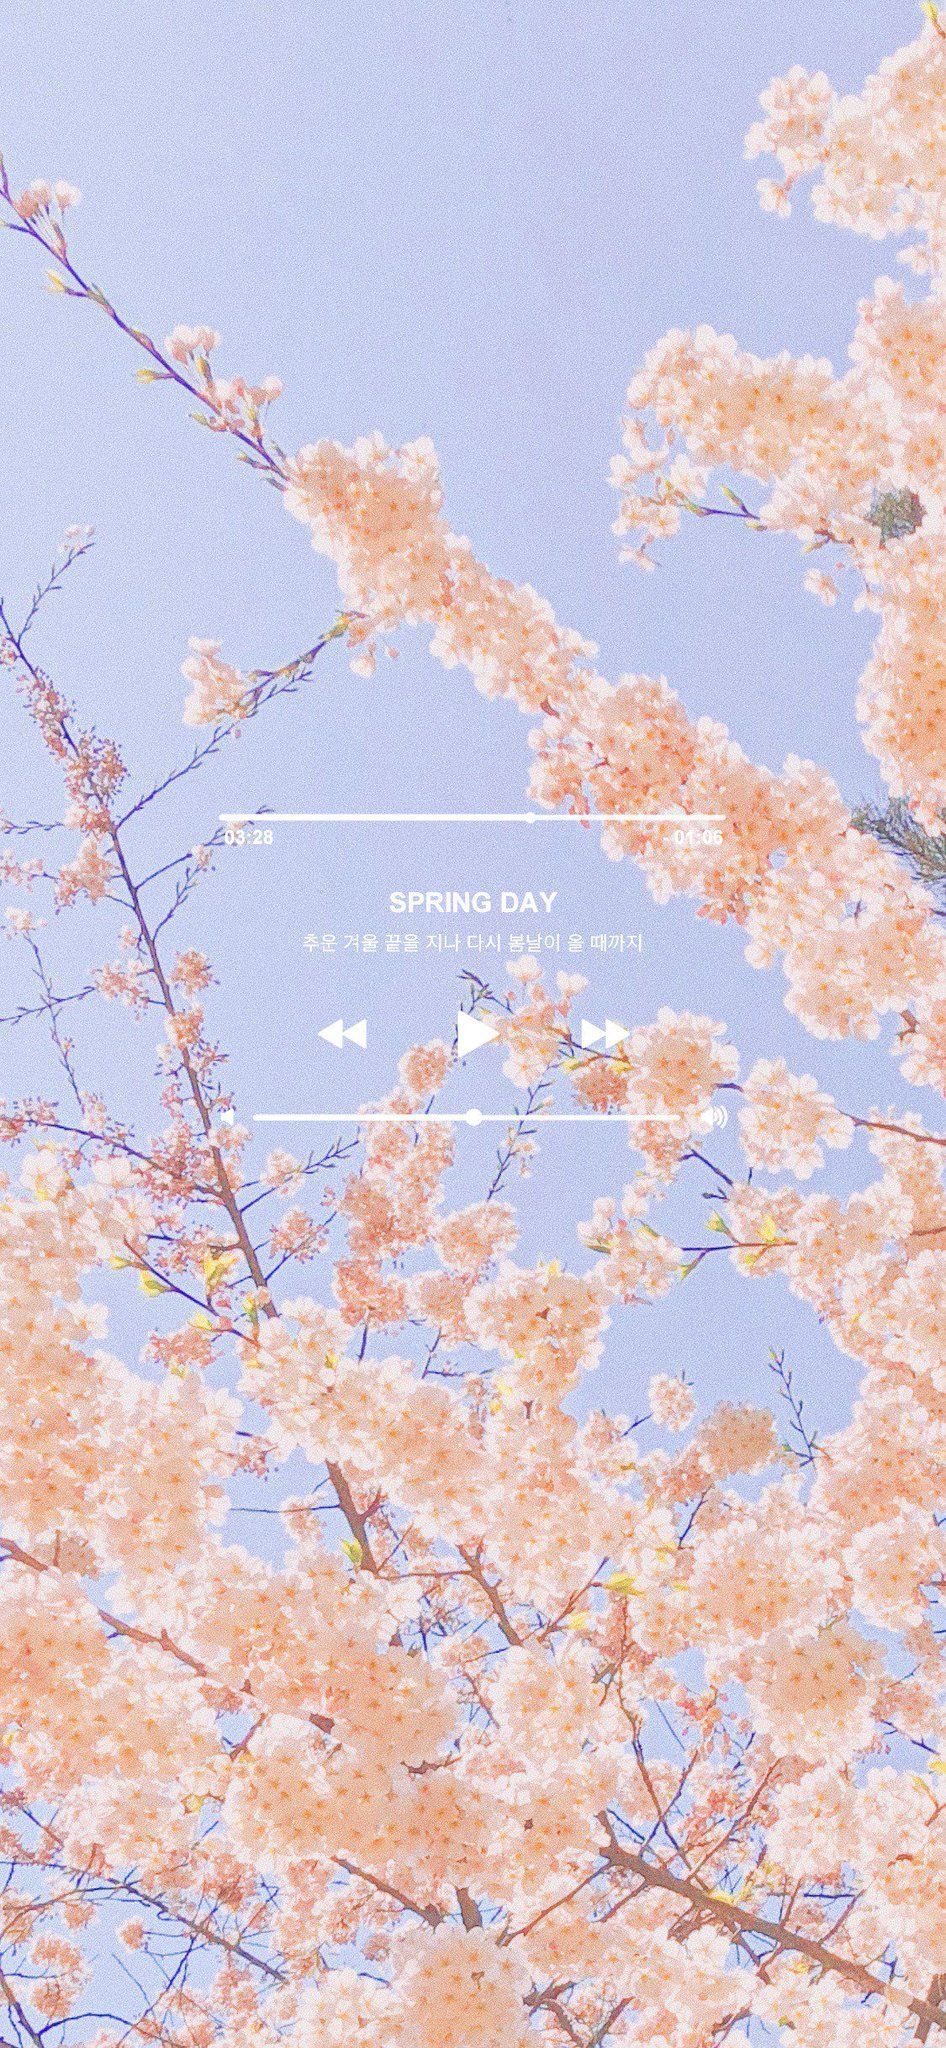 A spring day wallpaper with a blue sky and pink flowers - Spring